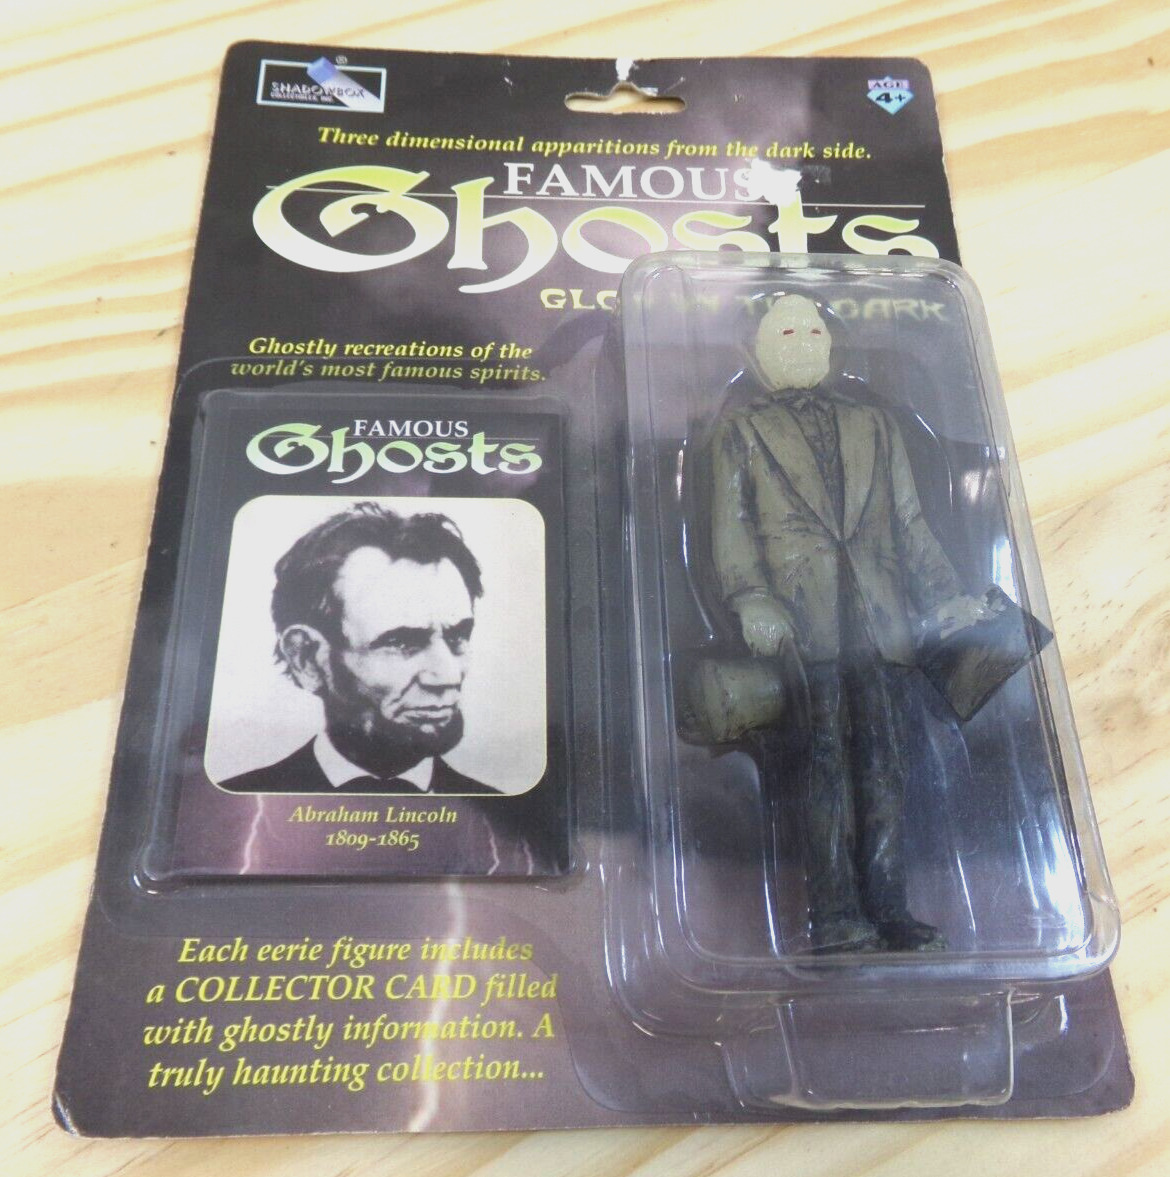 Shadowbox Famous Ghosts Glow in the Dark Abraham Lincoln #66001